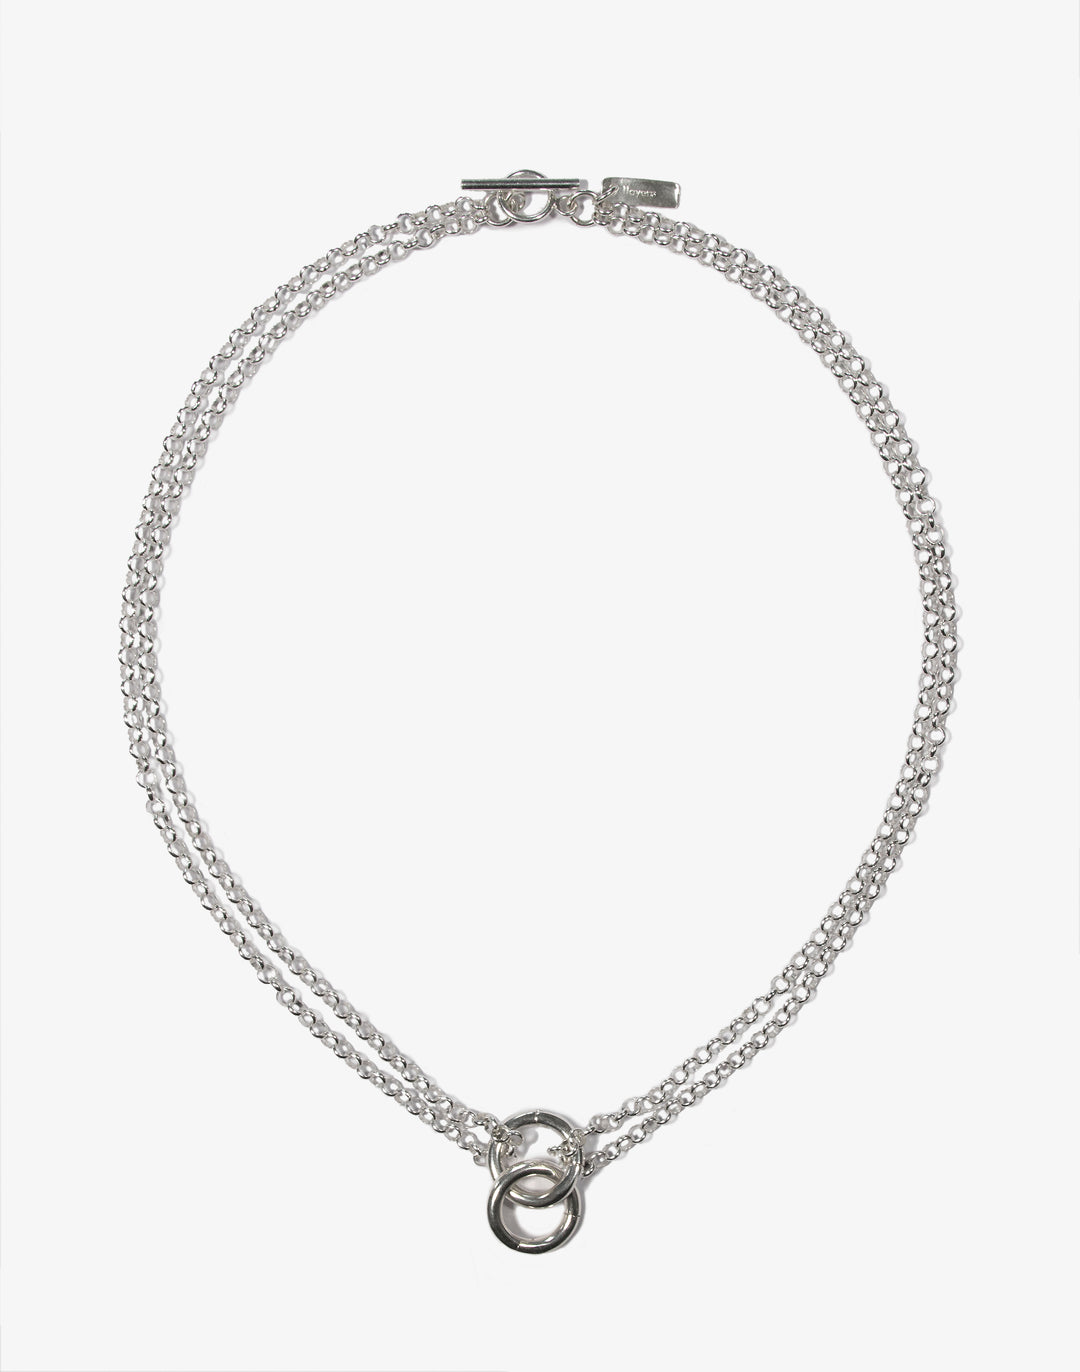 llayers jewelry unite unisex men silver chain rings choker necklace - Made In Brookyn New York 4